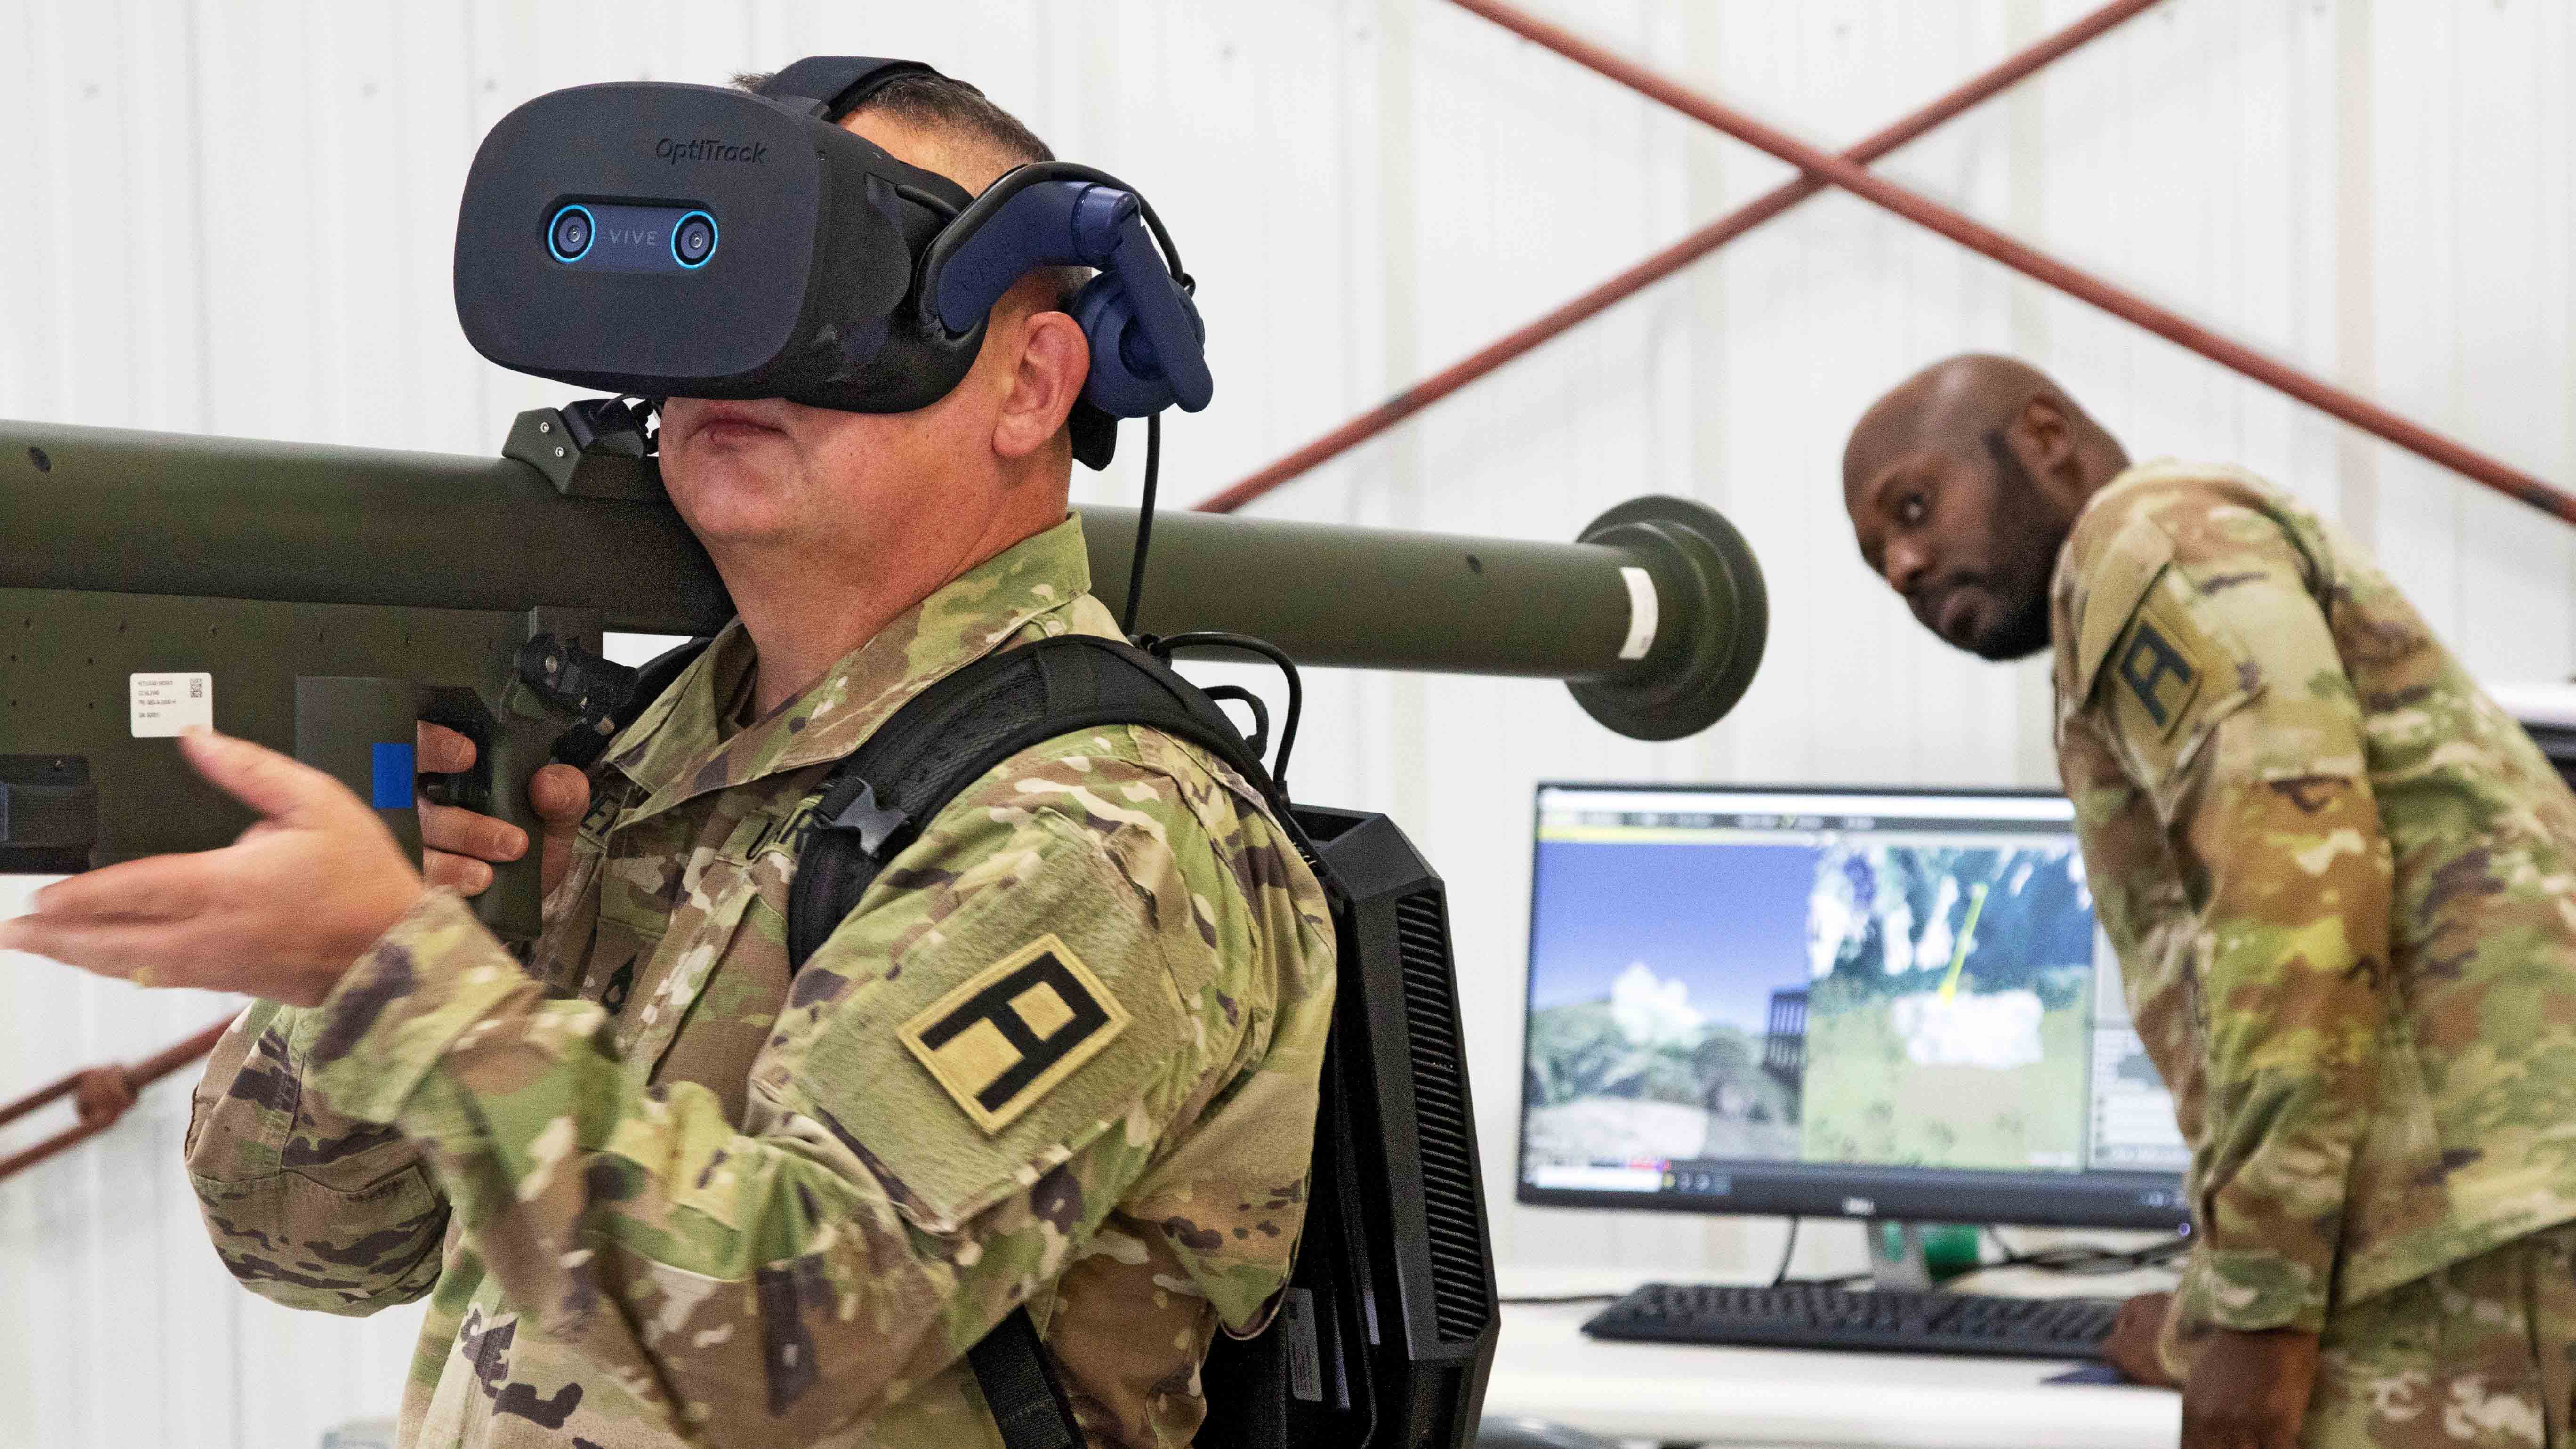 Soldiers training virtually